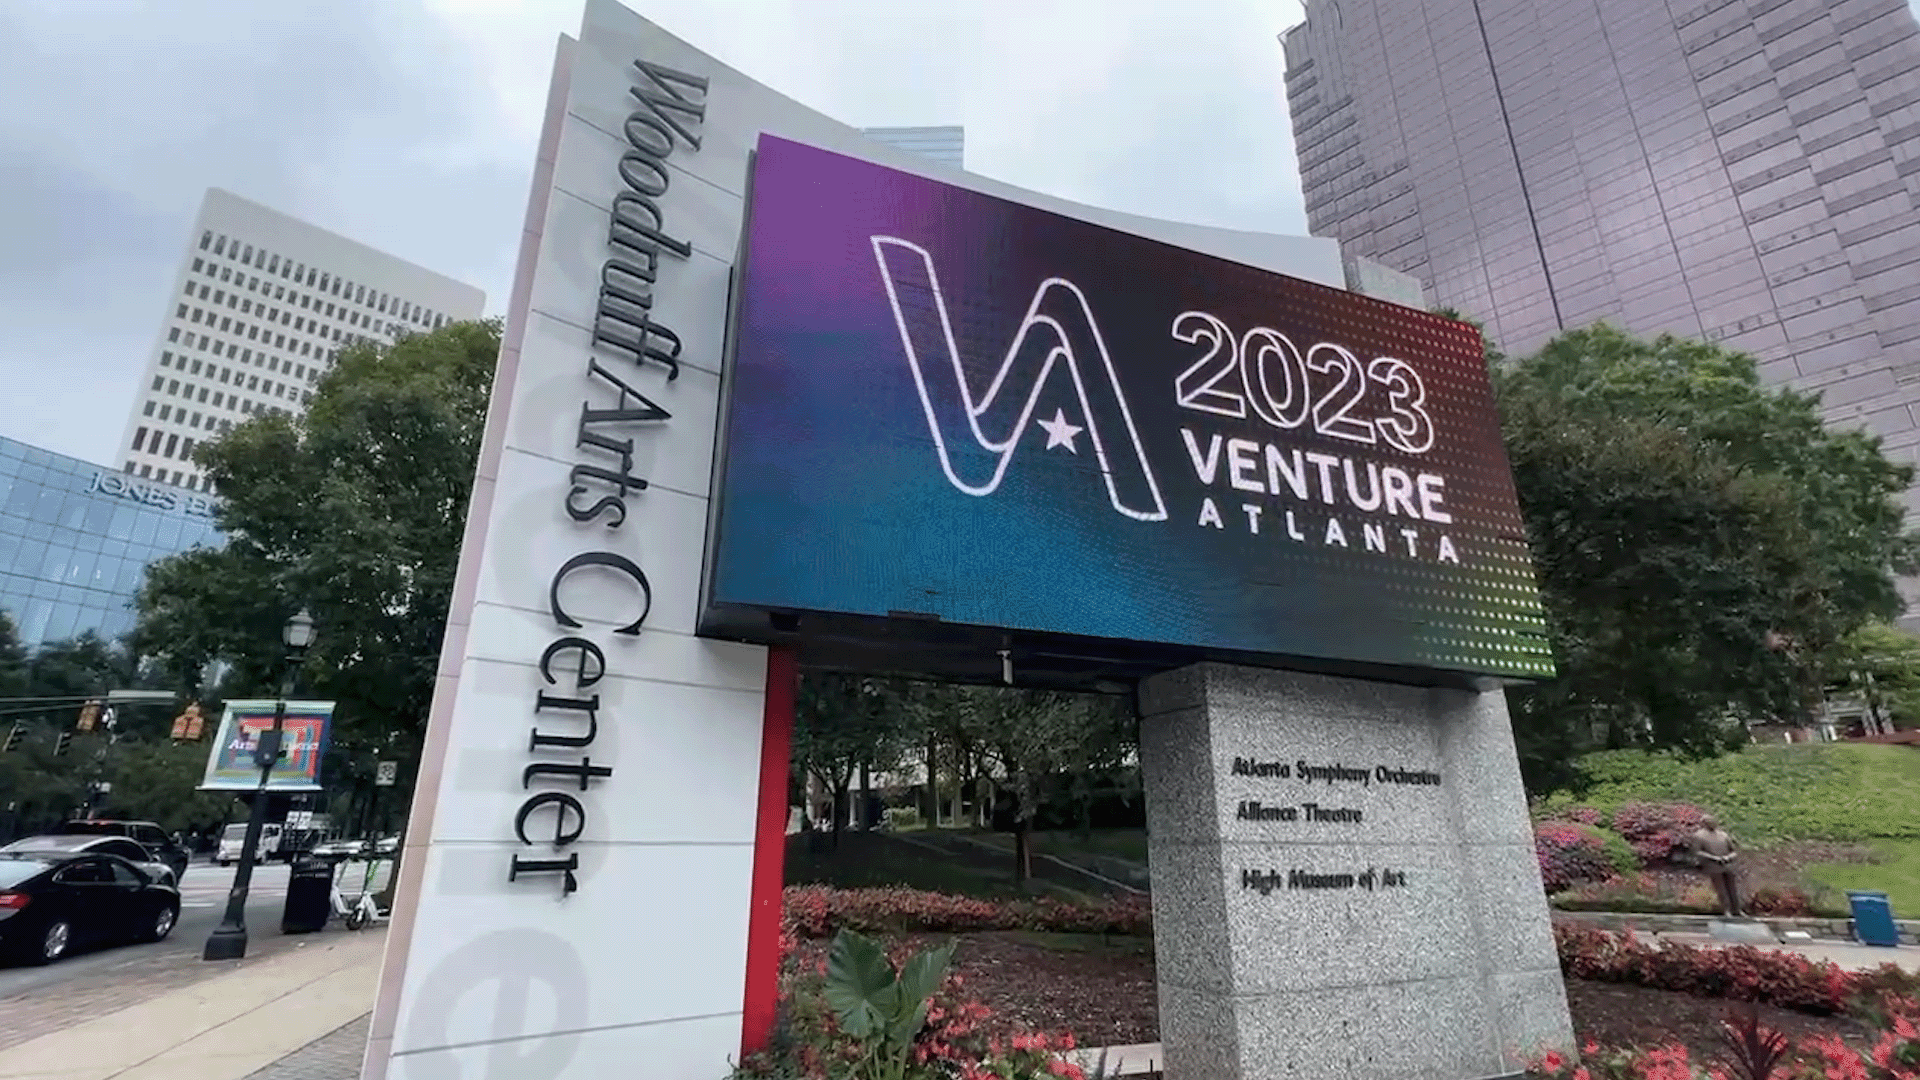 Outdoor monument for the Woodruff Arts Center and Venture Atlanta digital sign.